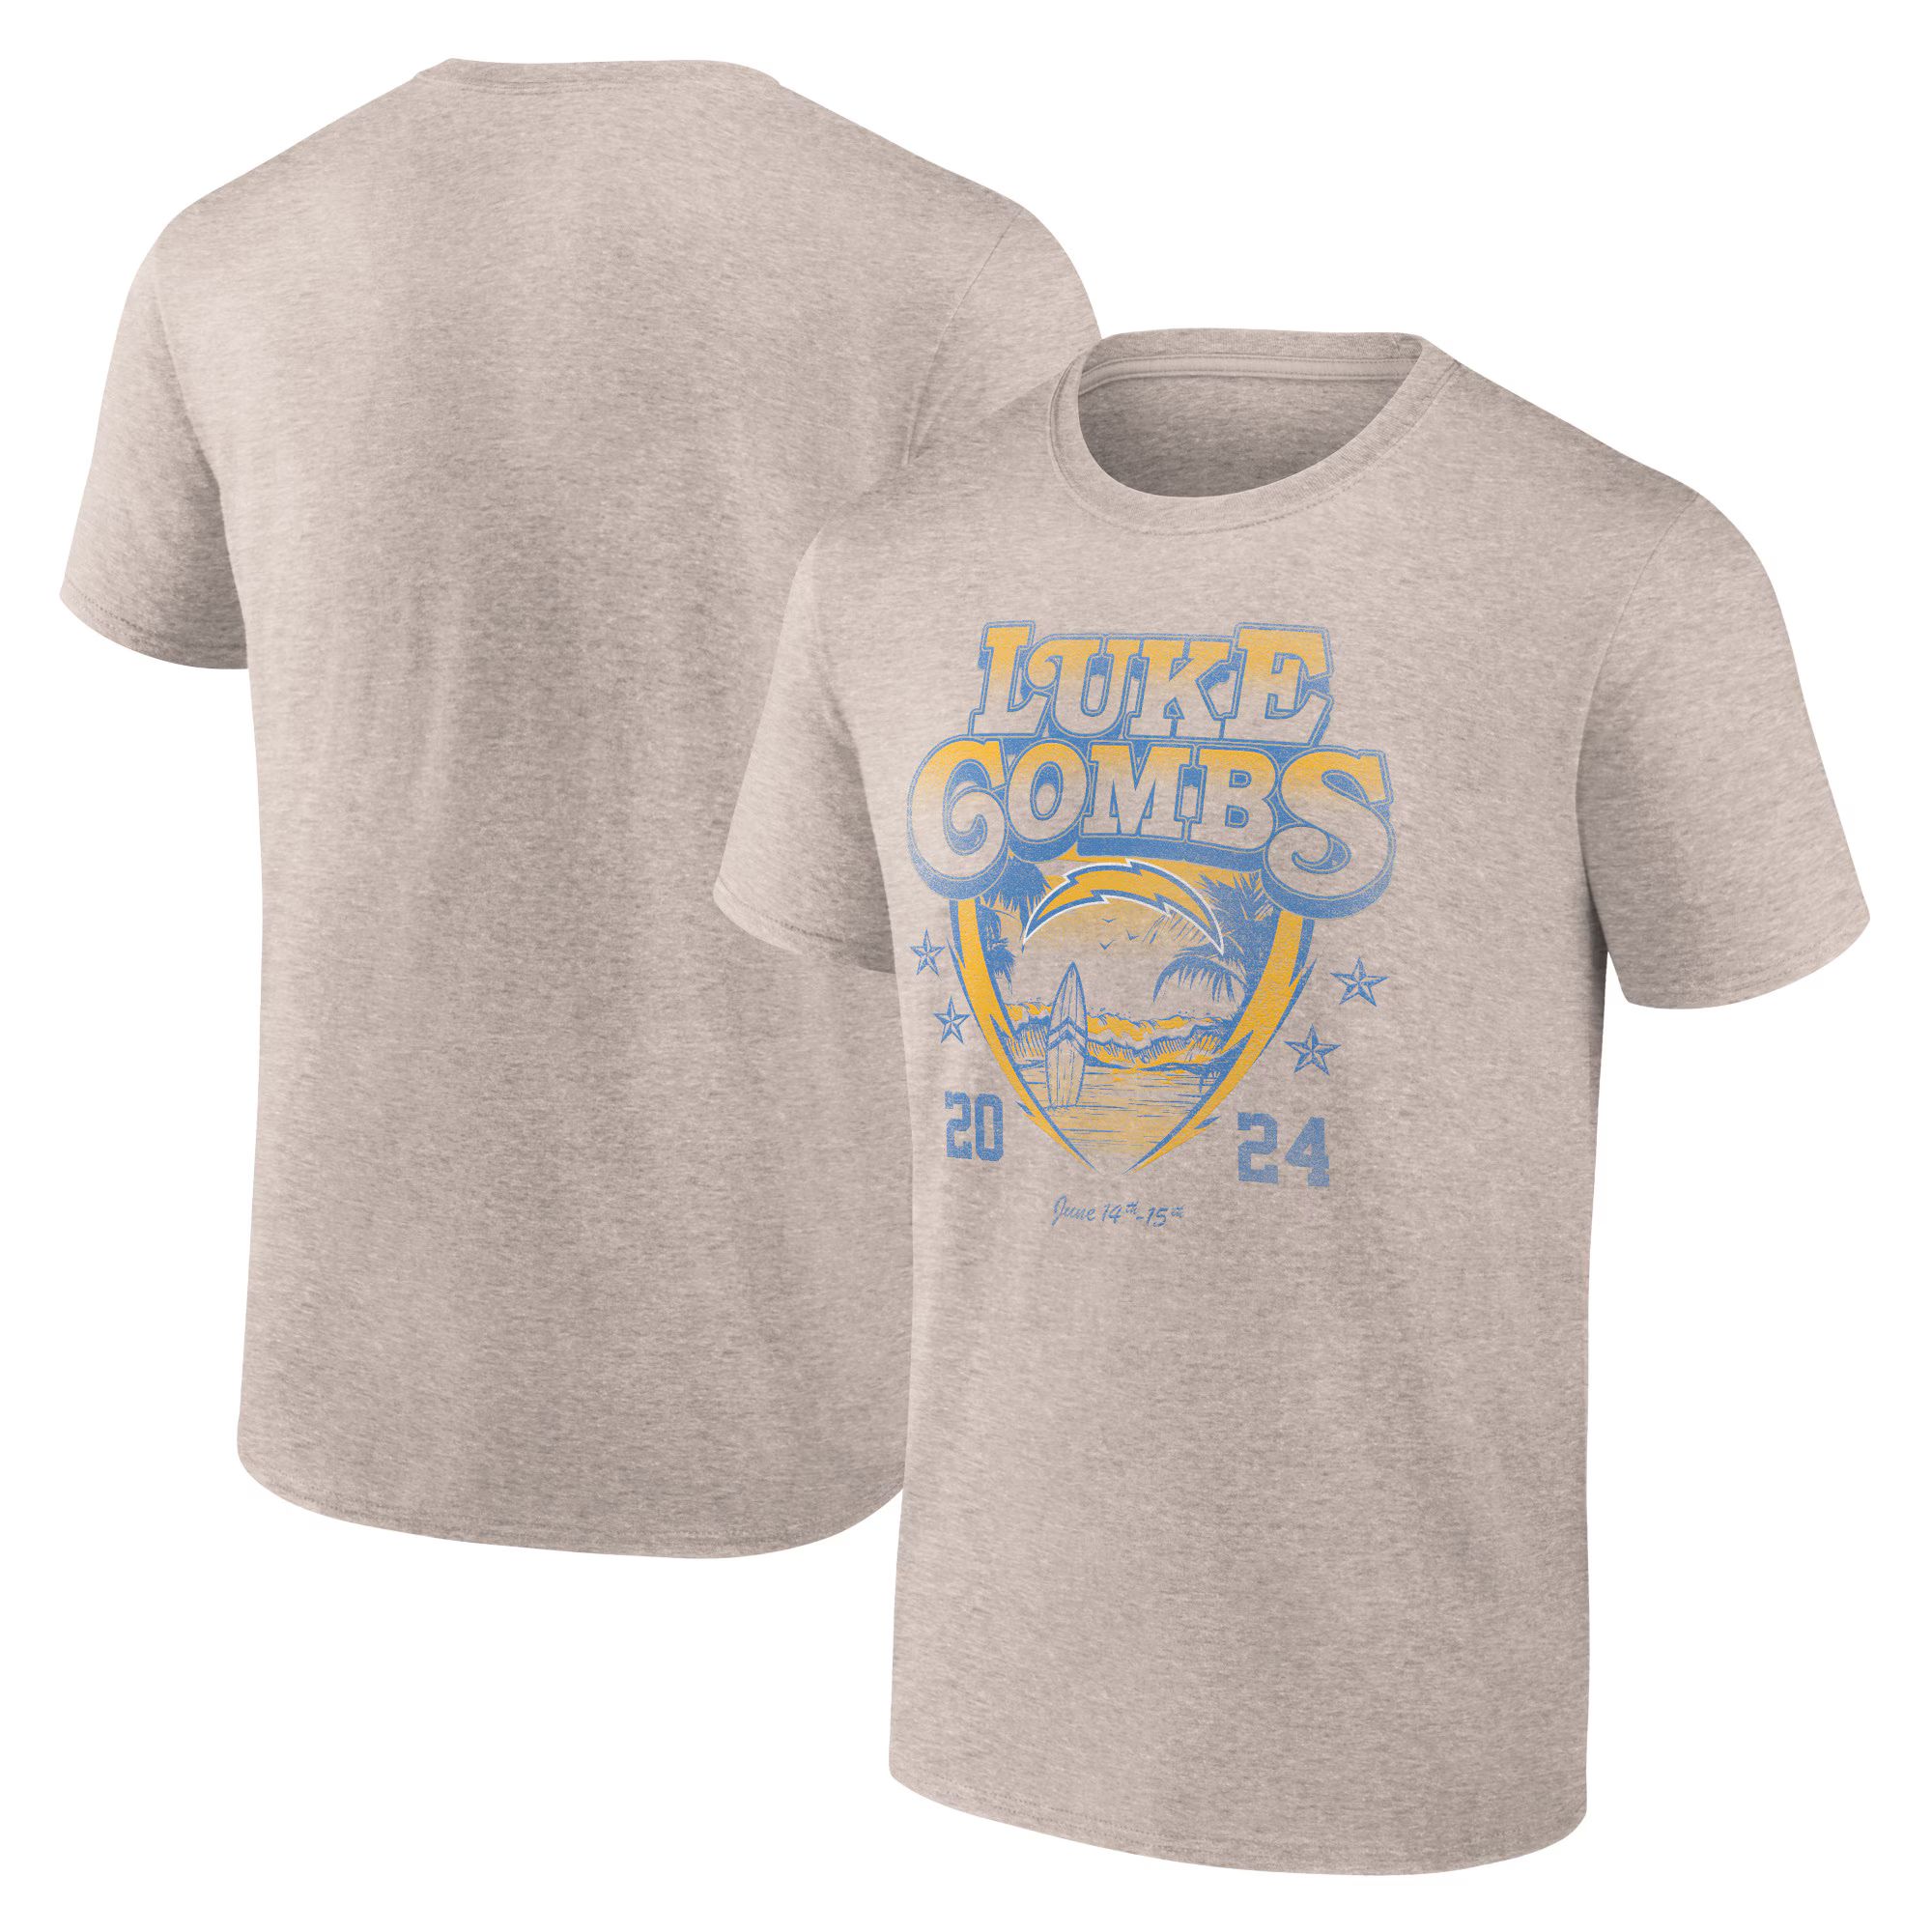 Luke Combs x Los Angeles Chargers Fanatics Branded Growin' Up and Gettin' Old Tour T-Shirt - Tan | Fanatics